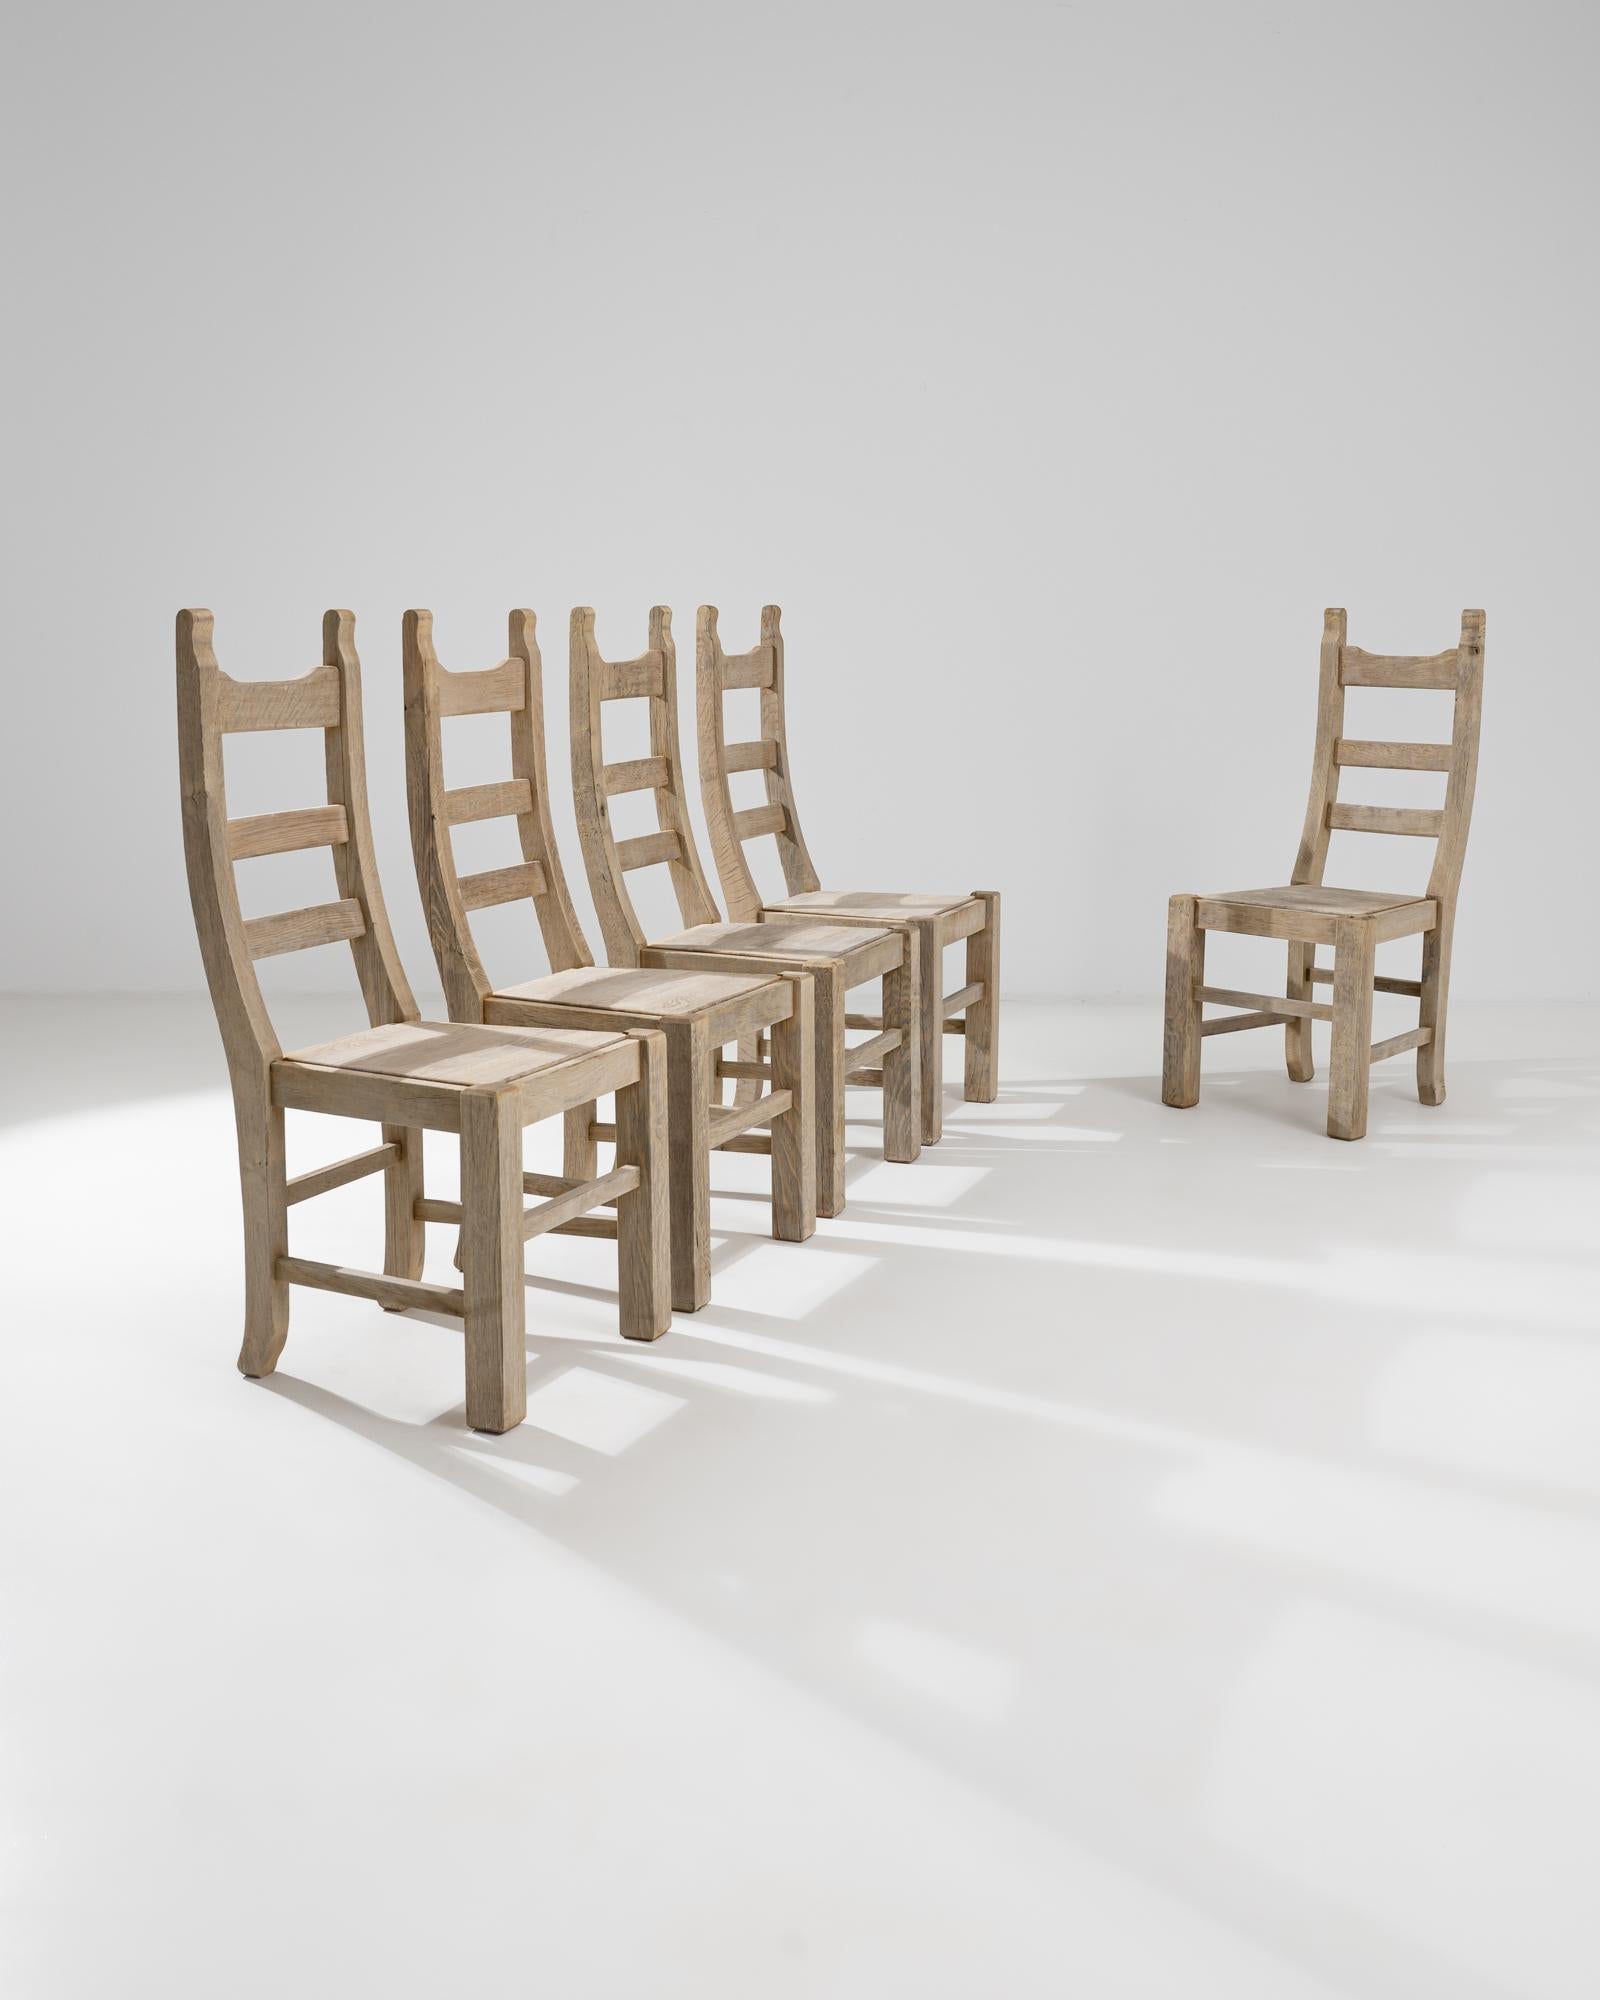 A set of wooden dining chairs from Belgium, circa 1960. Gently rounded chair seats, offset mortise and tenon spindles, and gracefully arched backs craft a set of chairs that are easy on the eyes. A careful refinishing process has enlivened the warm